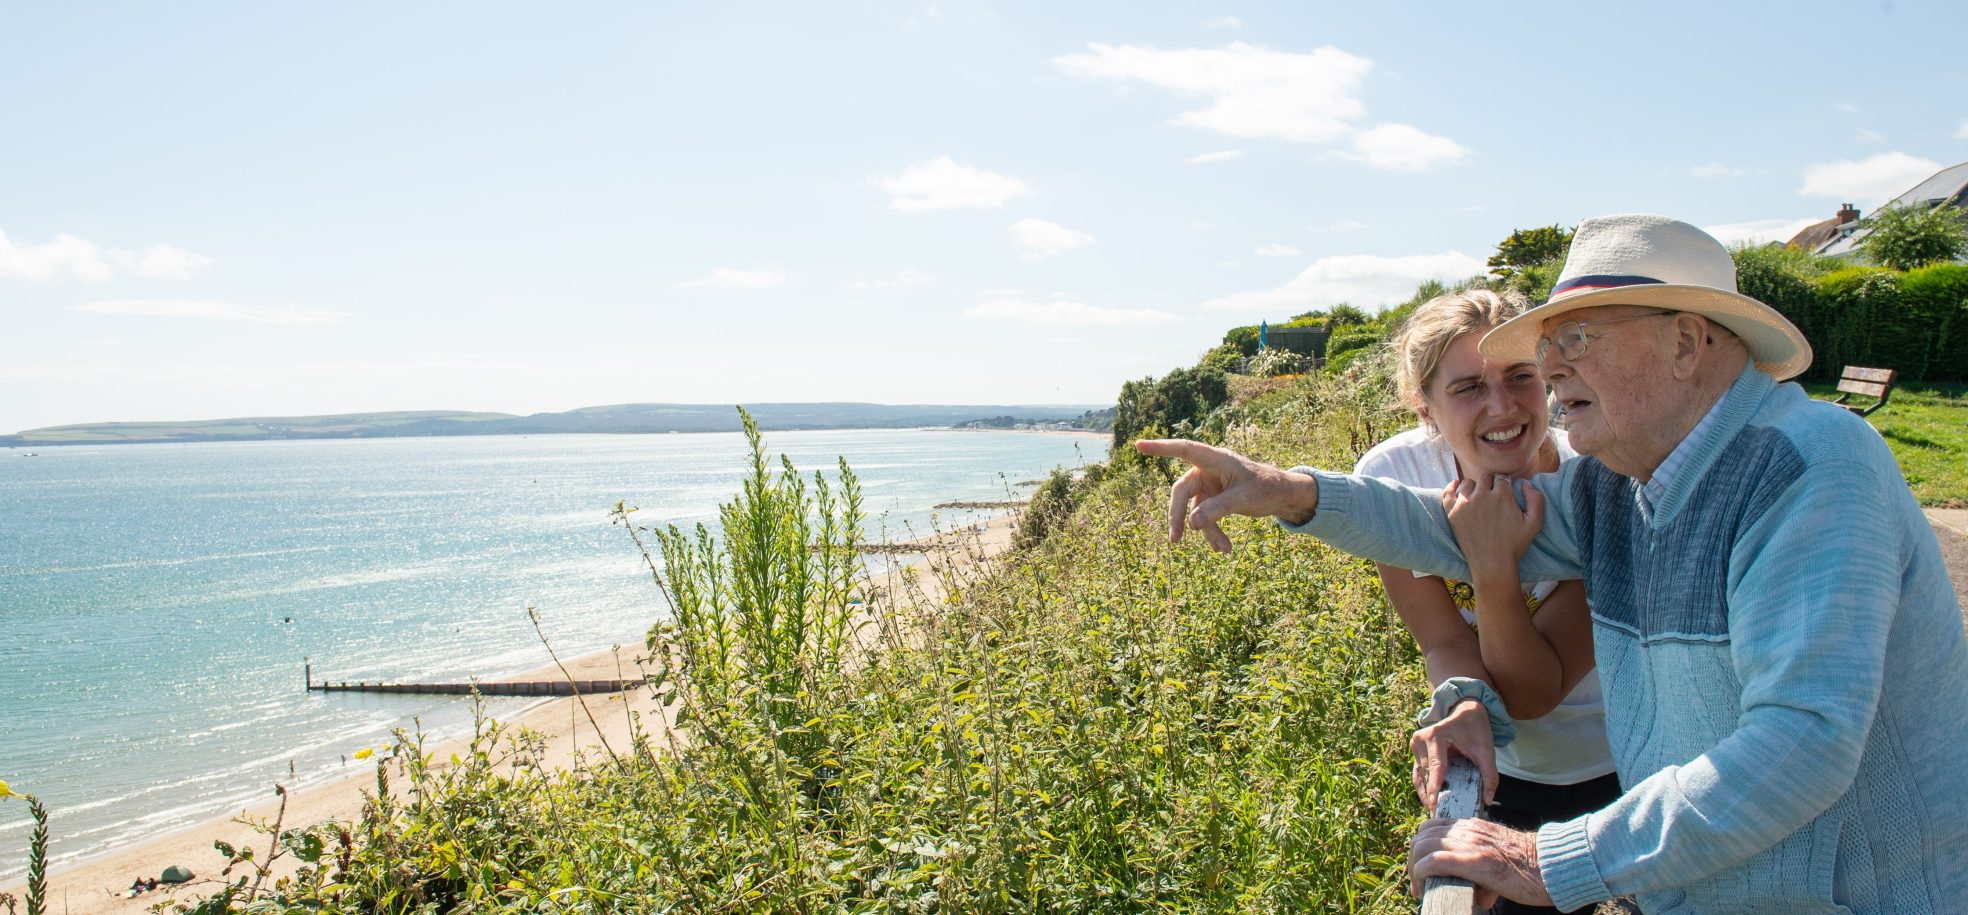 Activities Coordinator Sophie Smith and resident Ron Jones from Zetland Court looking at the beach in Bournemouth.